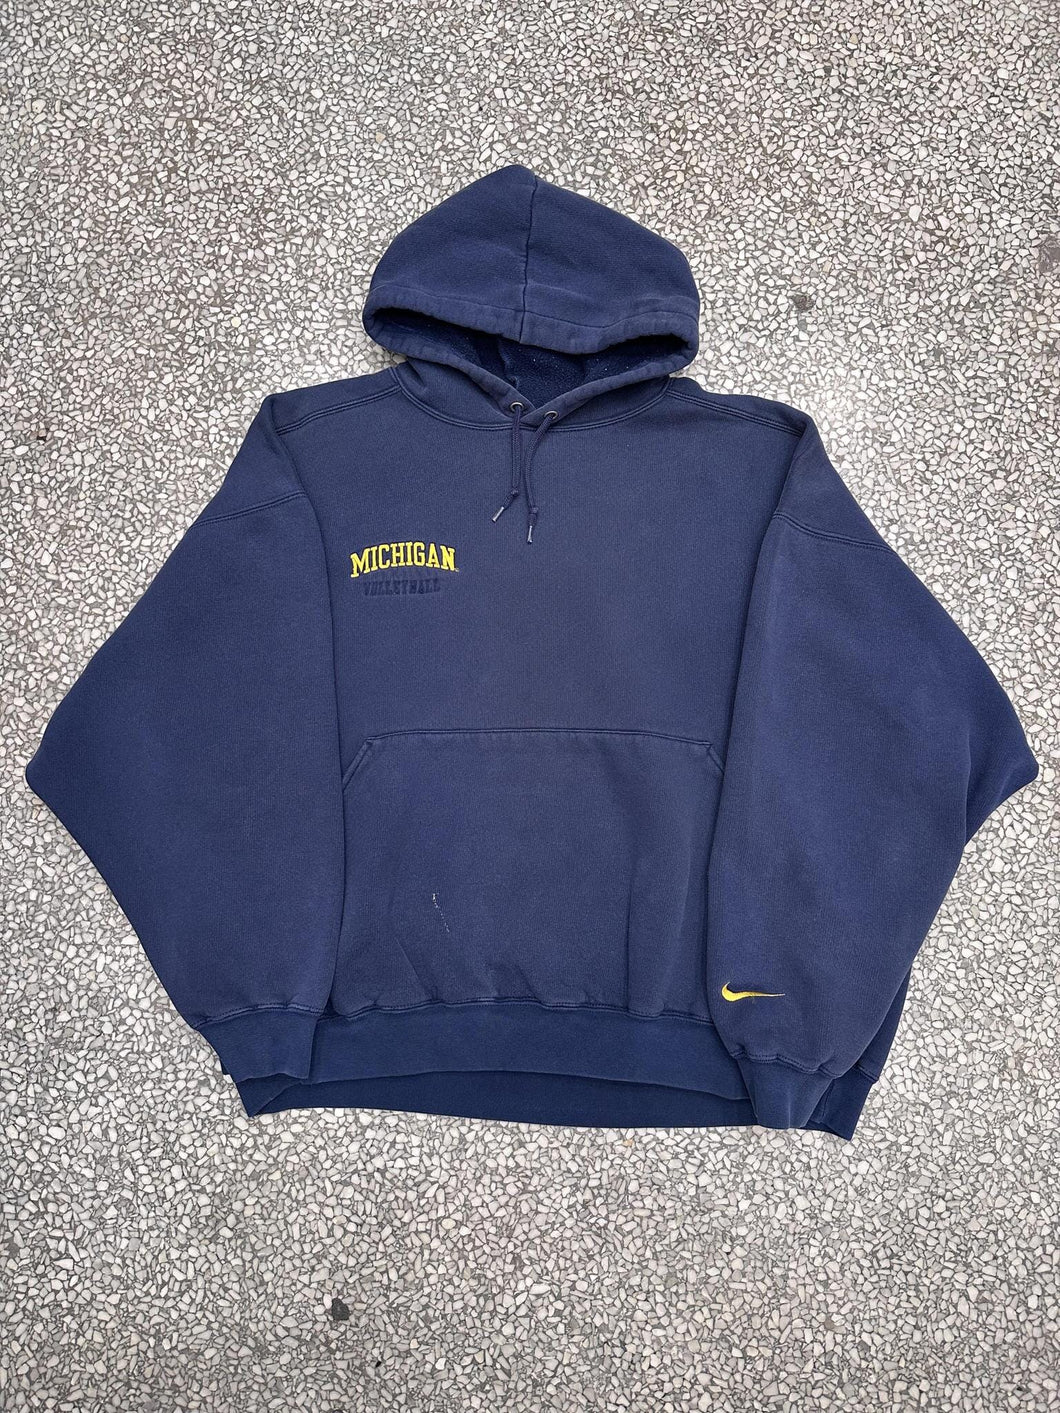 Michigan Wolverines Volleyball Vintage 90s Nike Hoodie Faded Navy ABC Vintage 